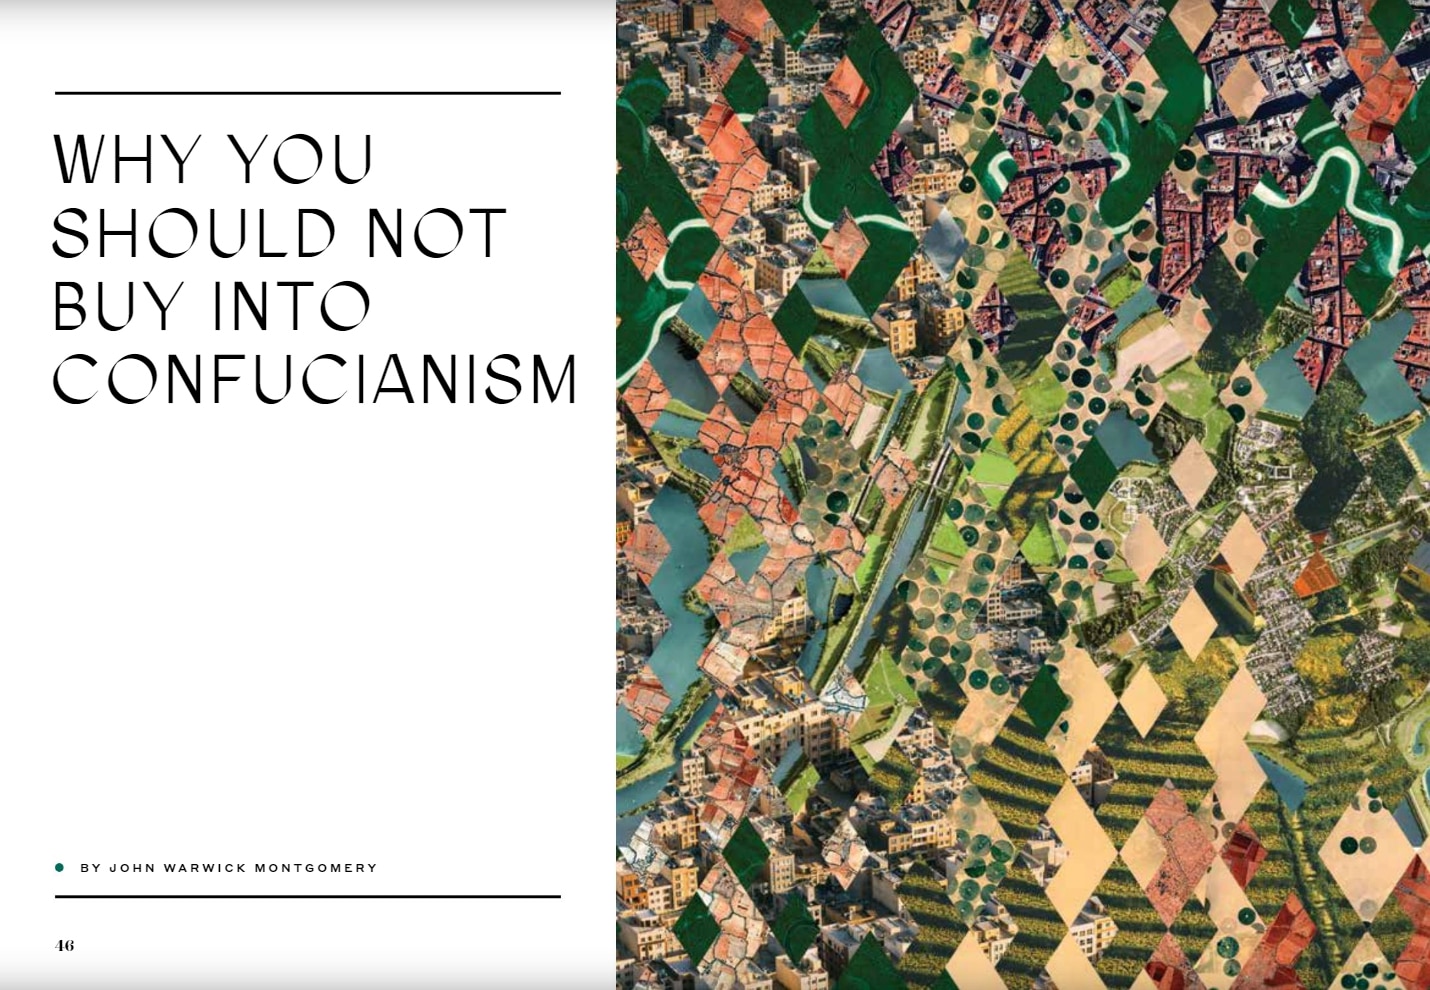 Why You Should Not Buy into Confucianism